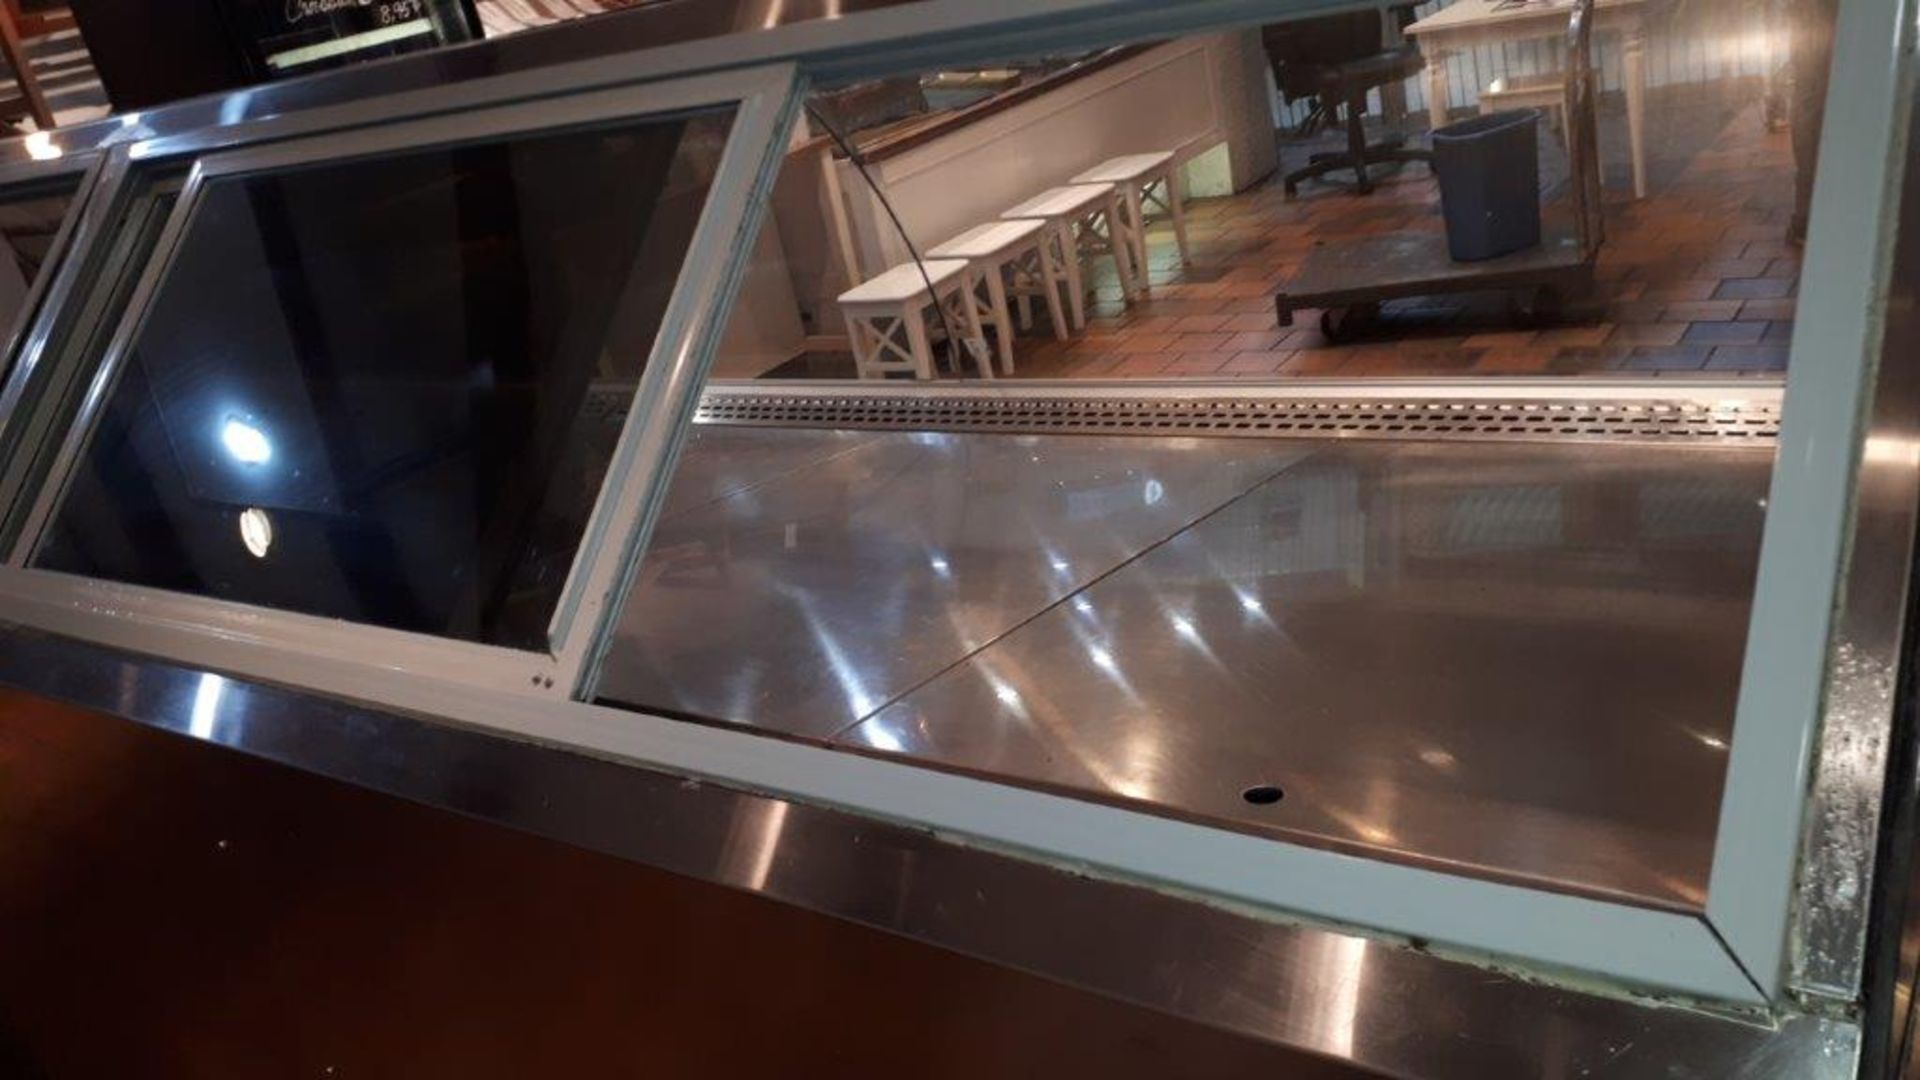 IFI DDIG-12TR Refrigerated glass display counter w/compressor,145” - Image 3 of 4